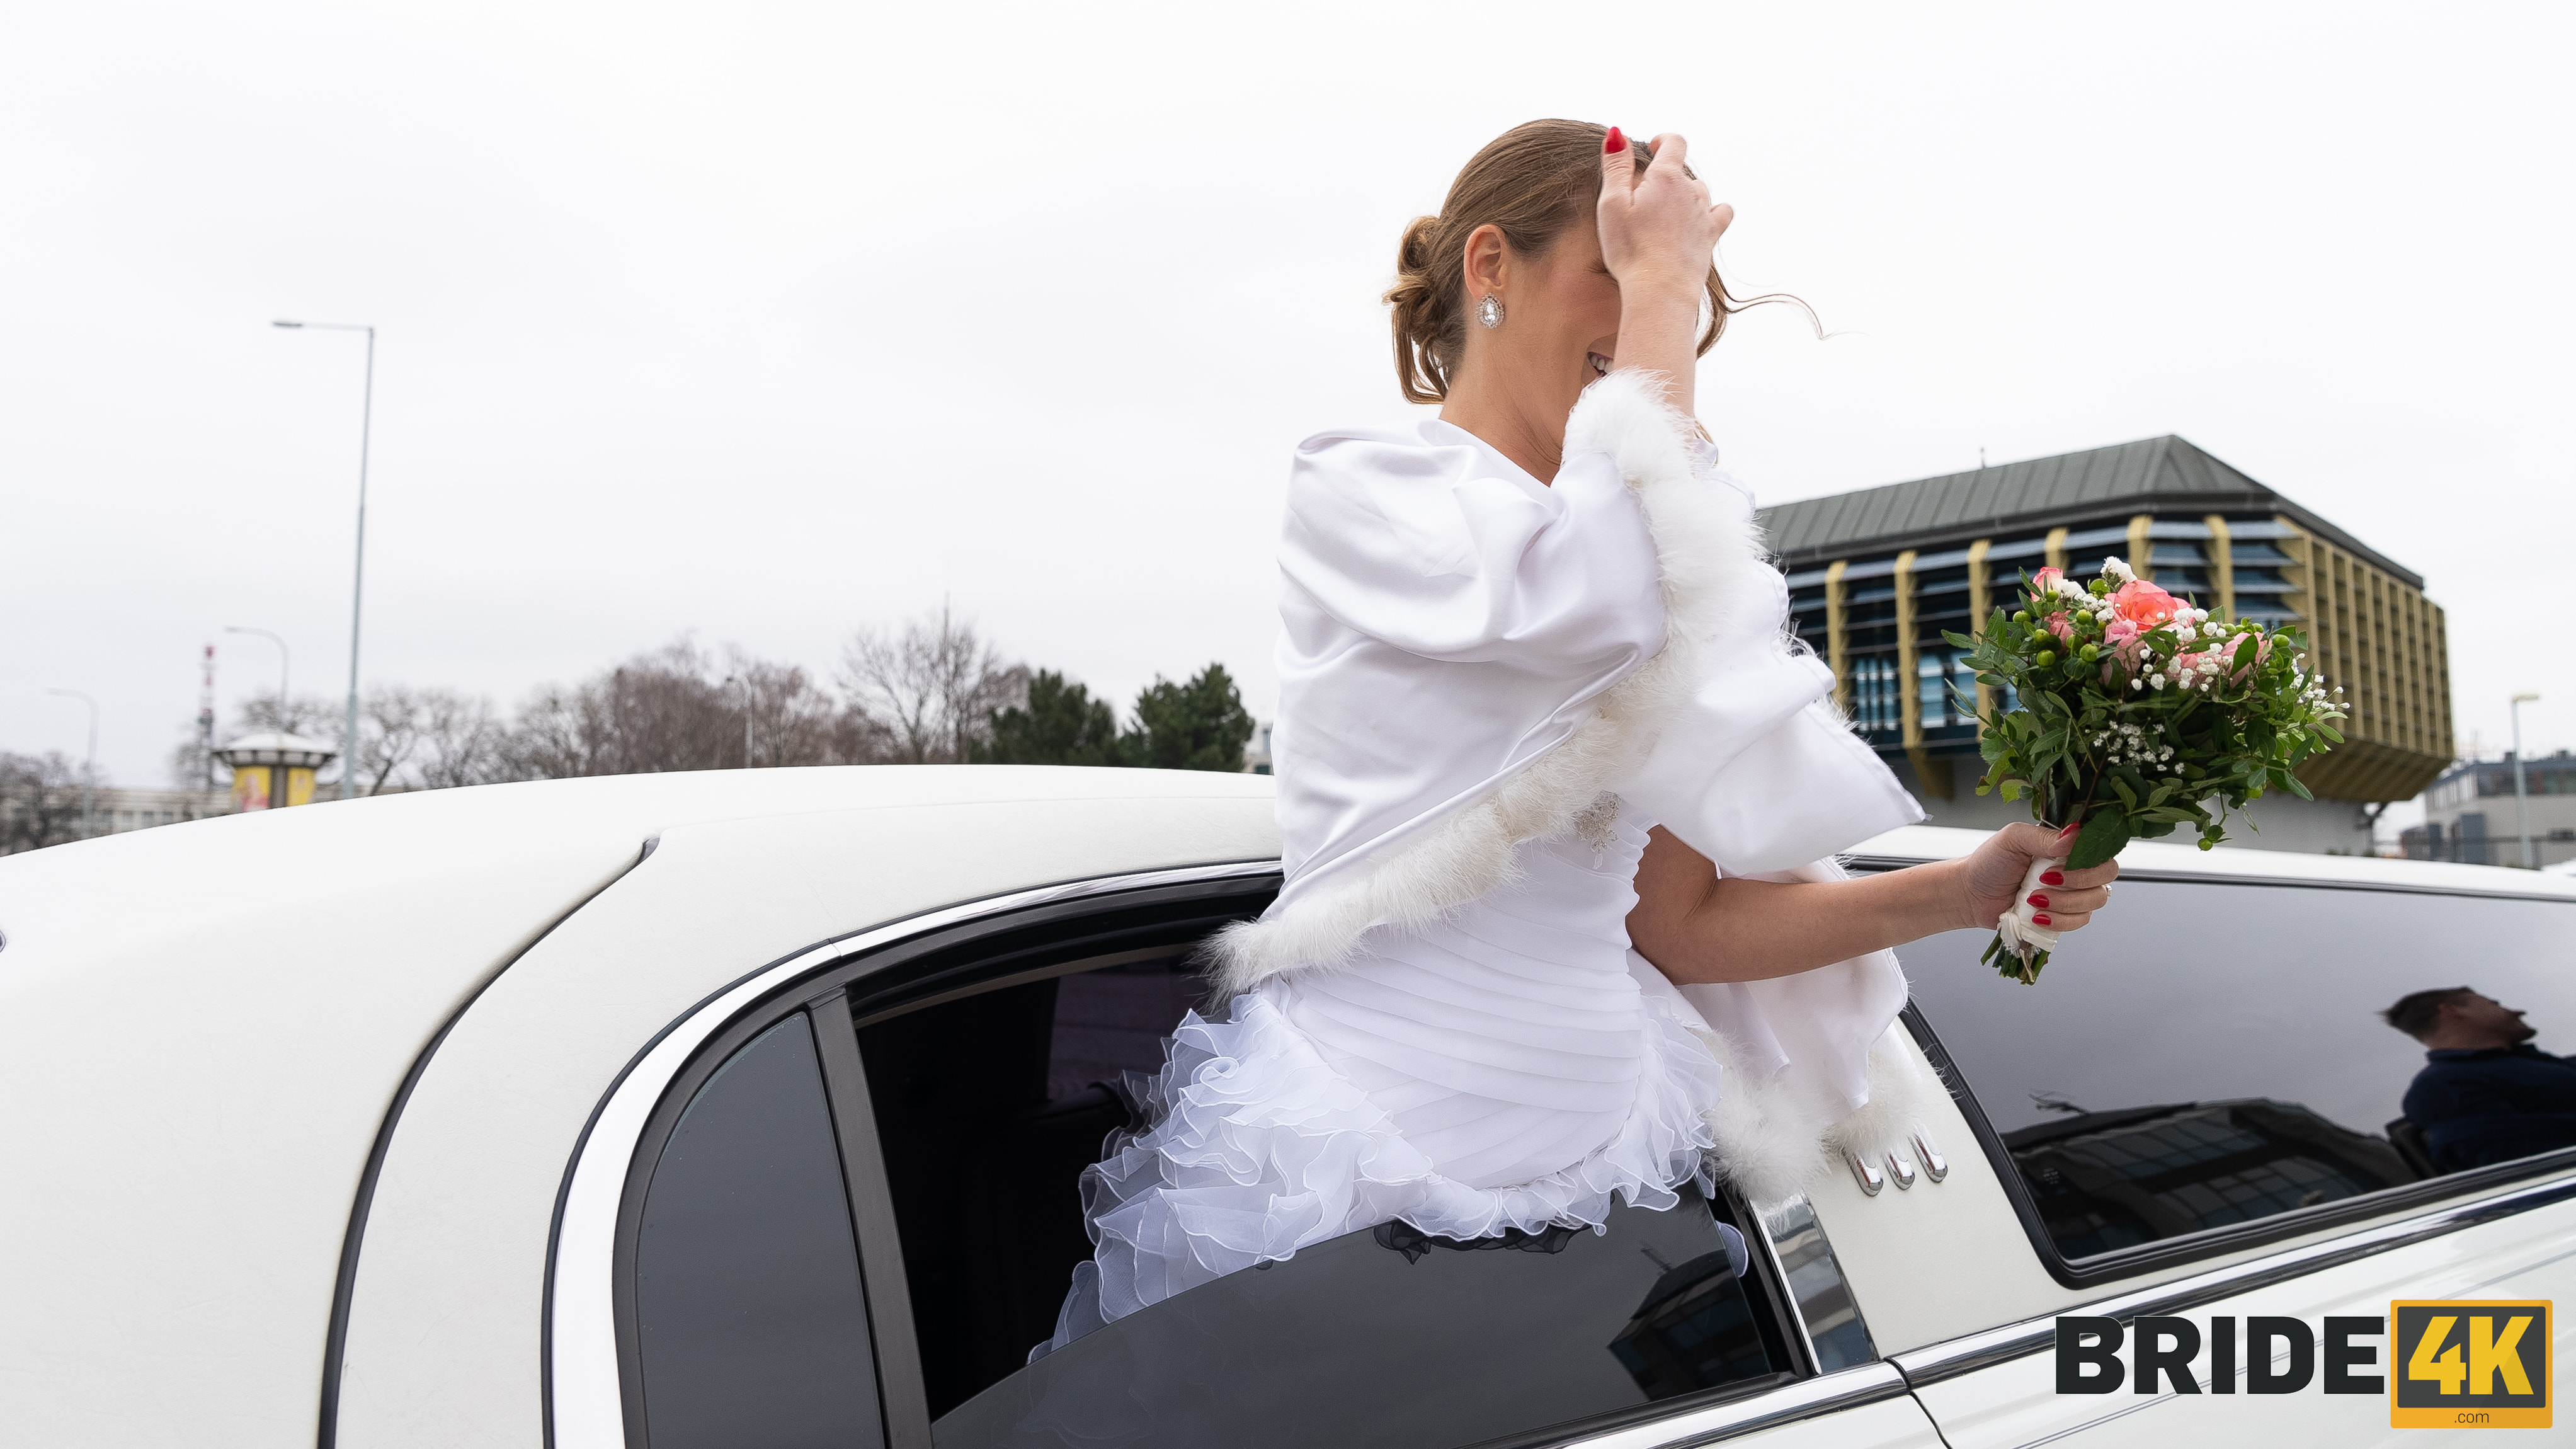 VIP 4K 'The Wedding Limo Chase' starring Alexis Crystal (Photo 1)